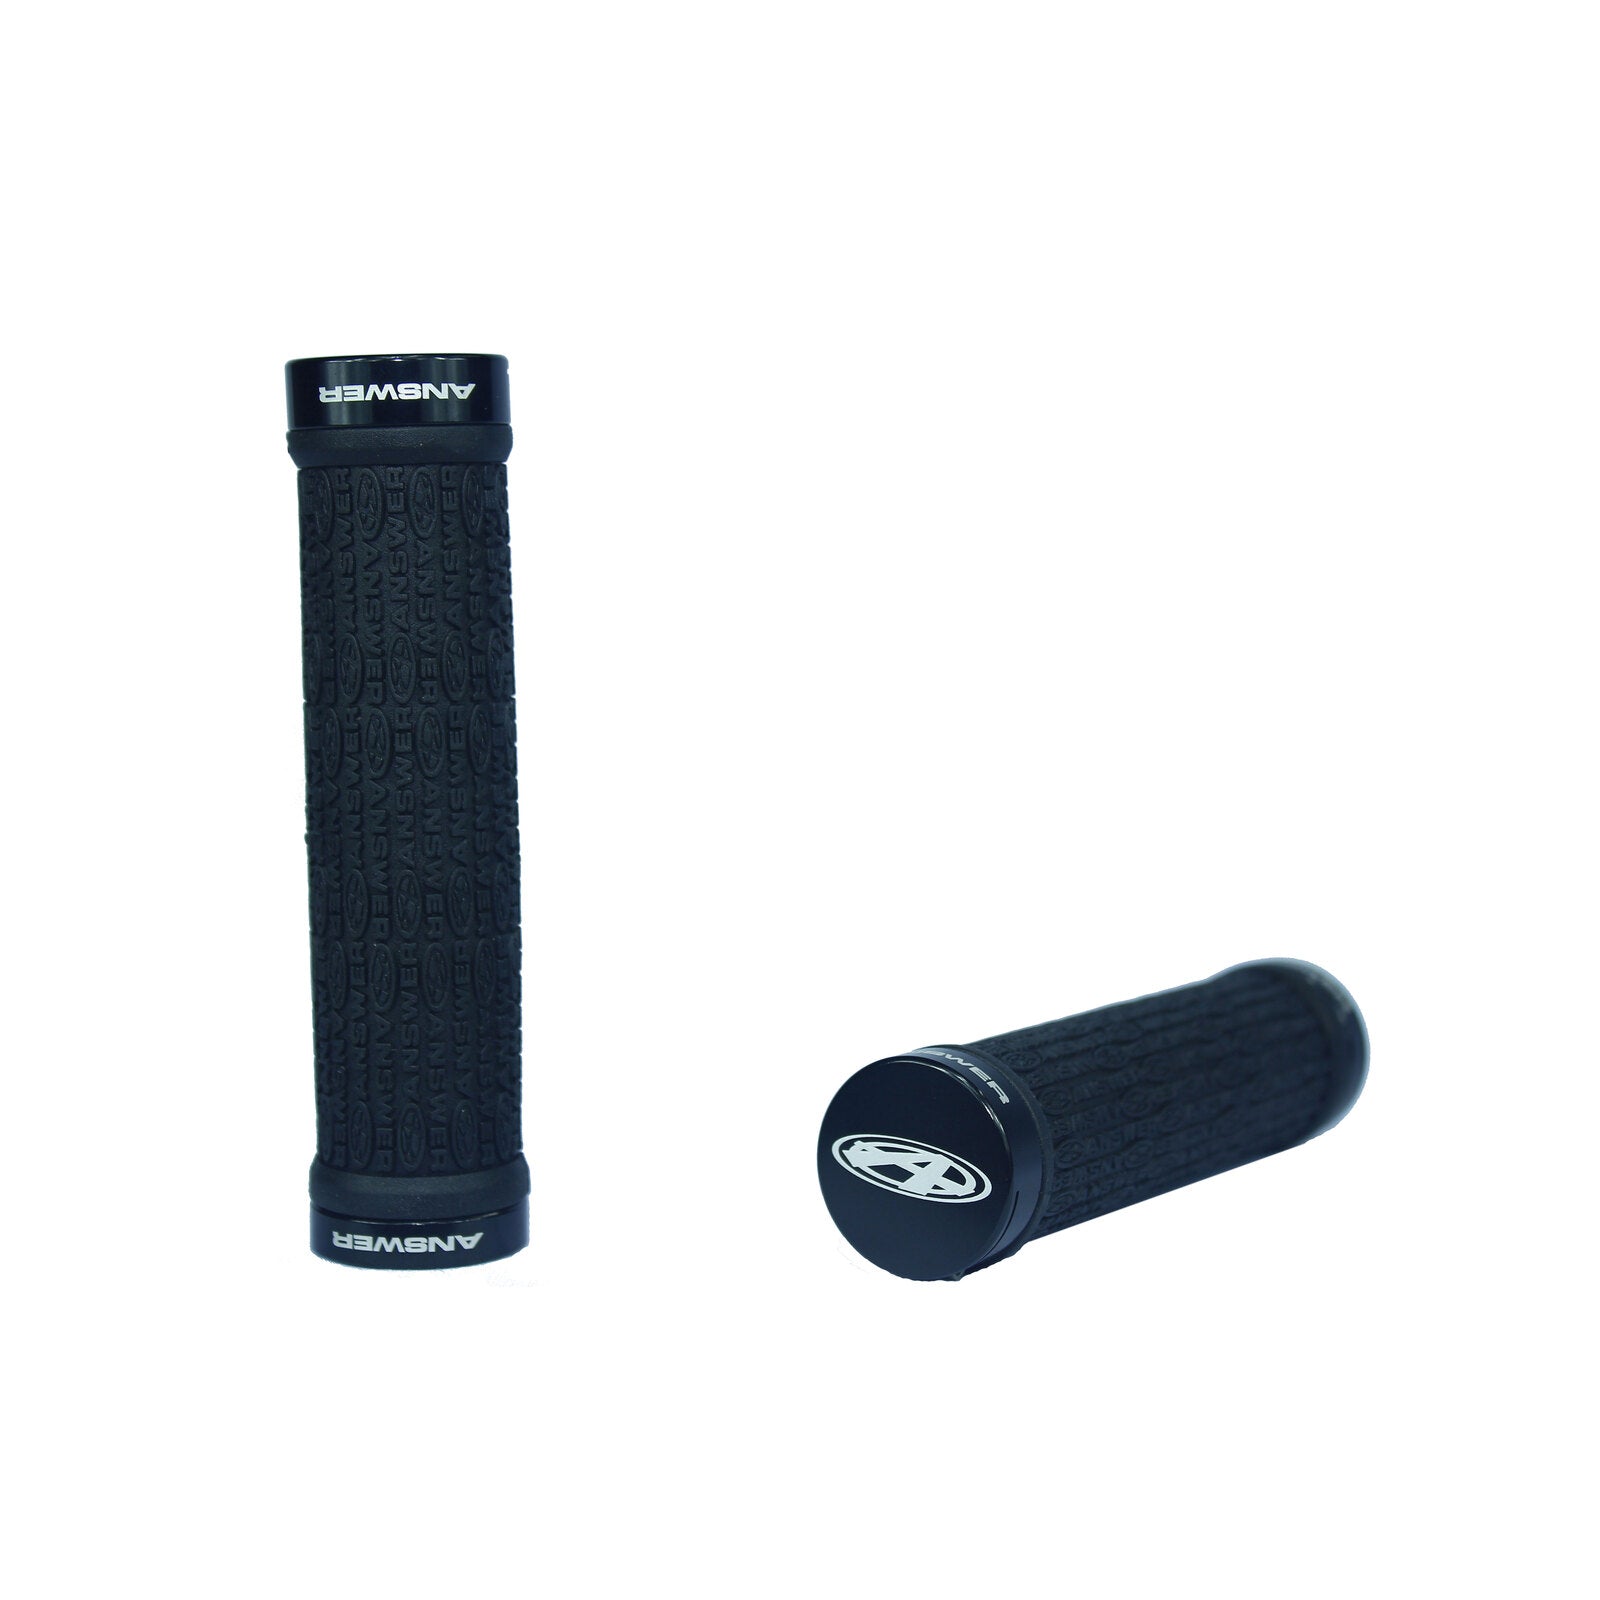 A pair of Answer Mini Lock-On Flangless Grips in black on a white background.